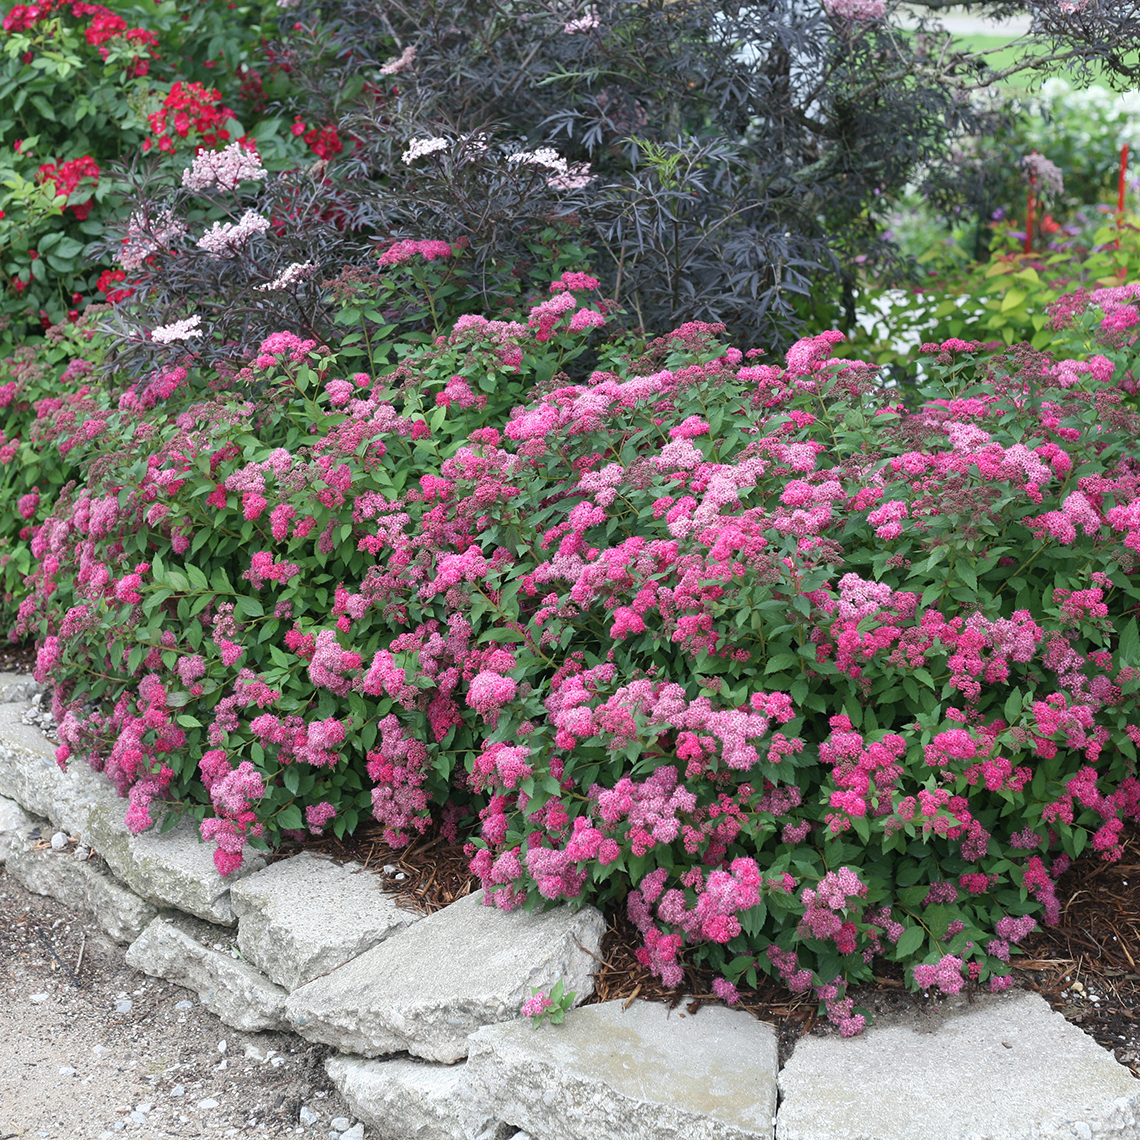 Planting of Double Play Pink Spiraea in front of Black Lace Sambucus